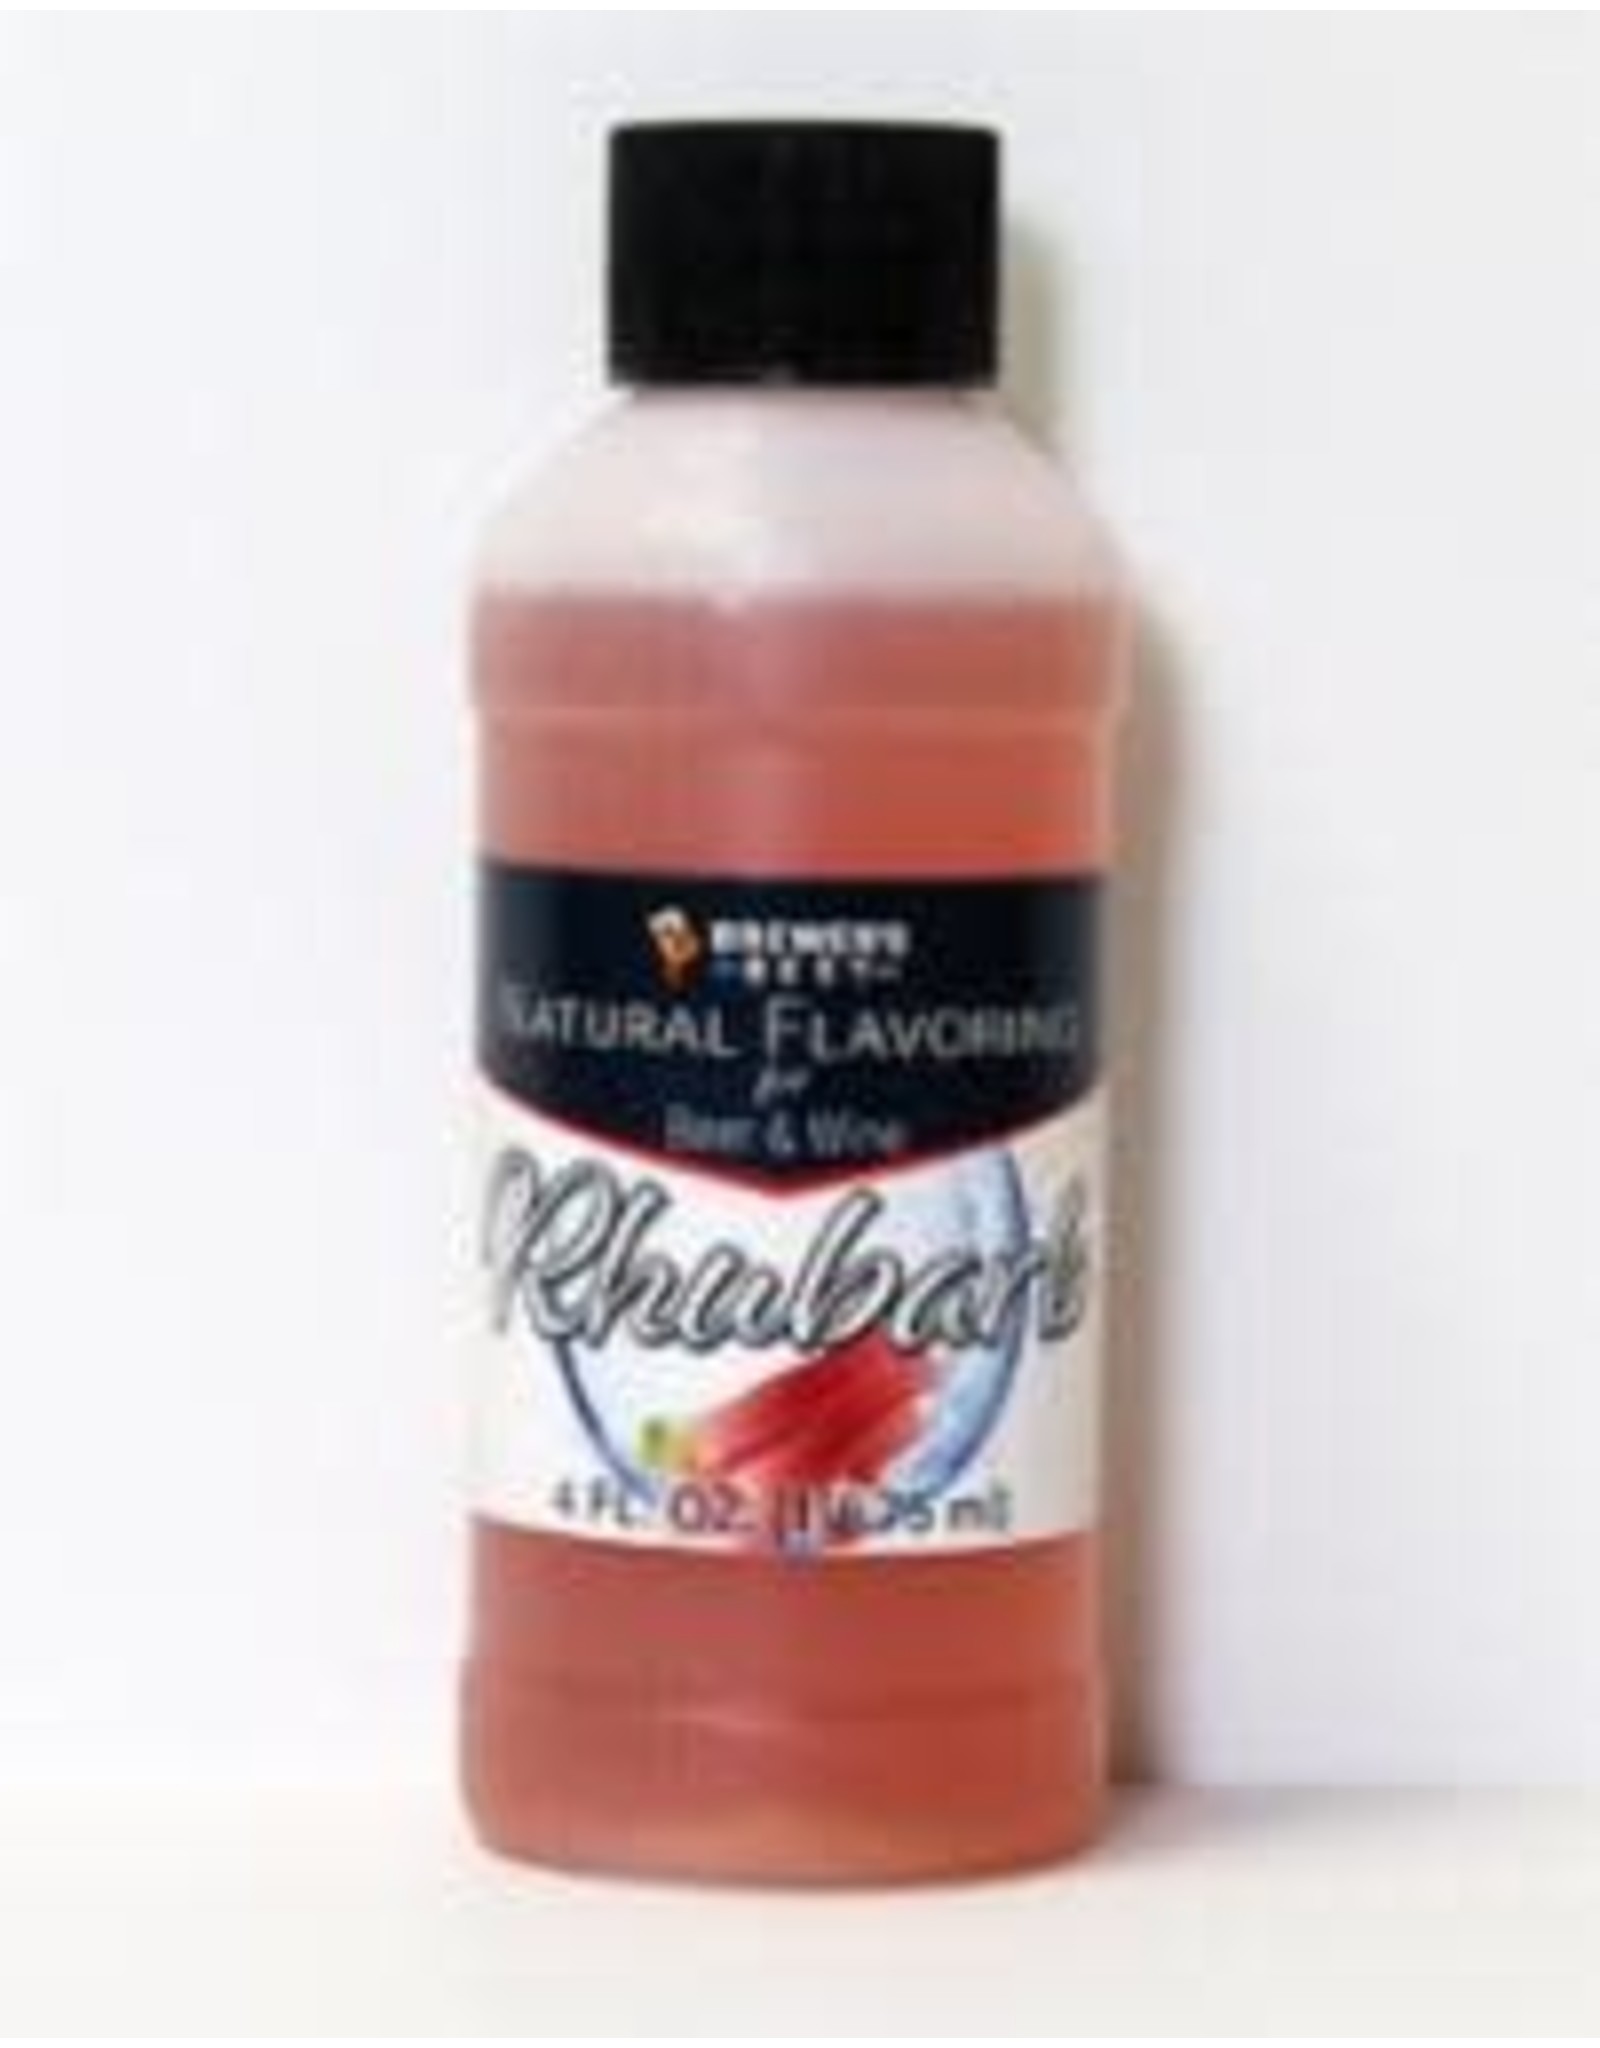 Brewer's Best All natural extract 4 oz Rhubarb